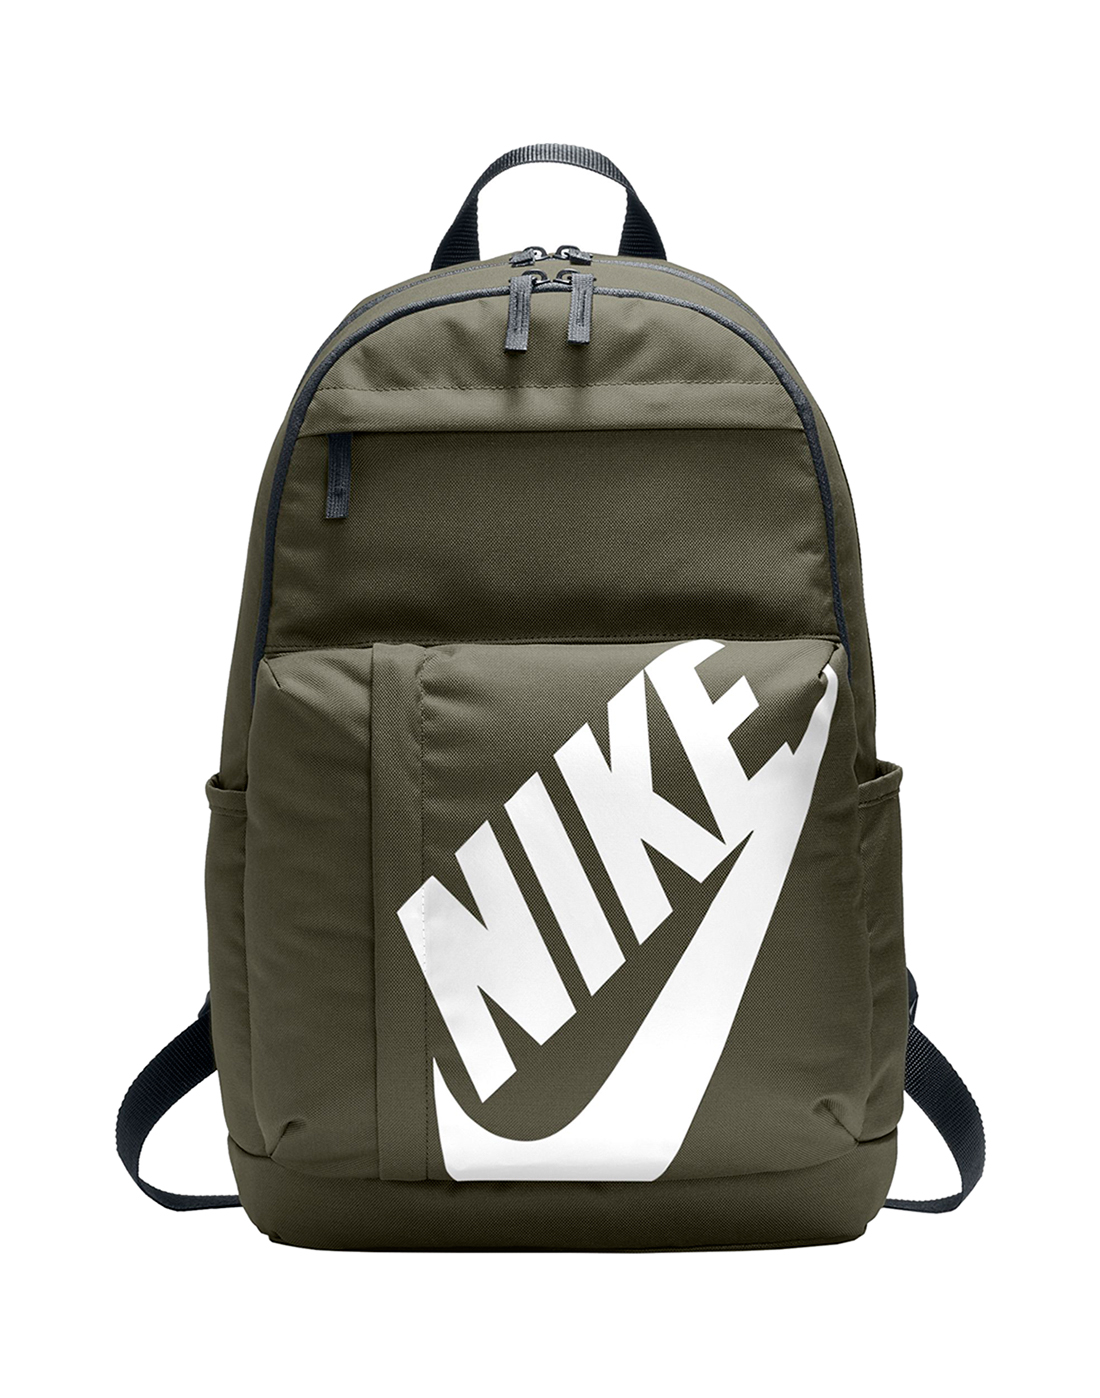 nike school bags at total sports